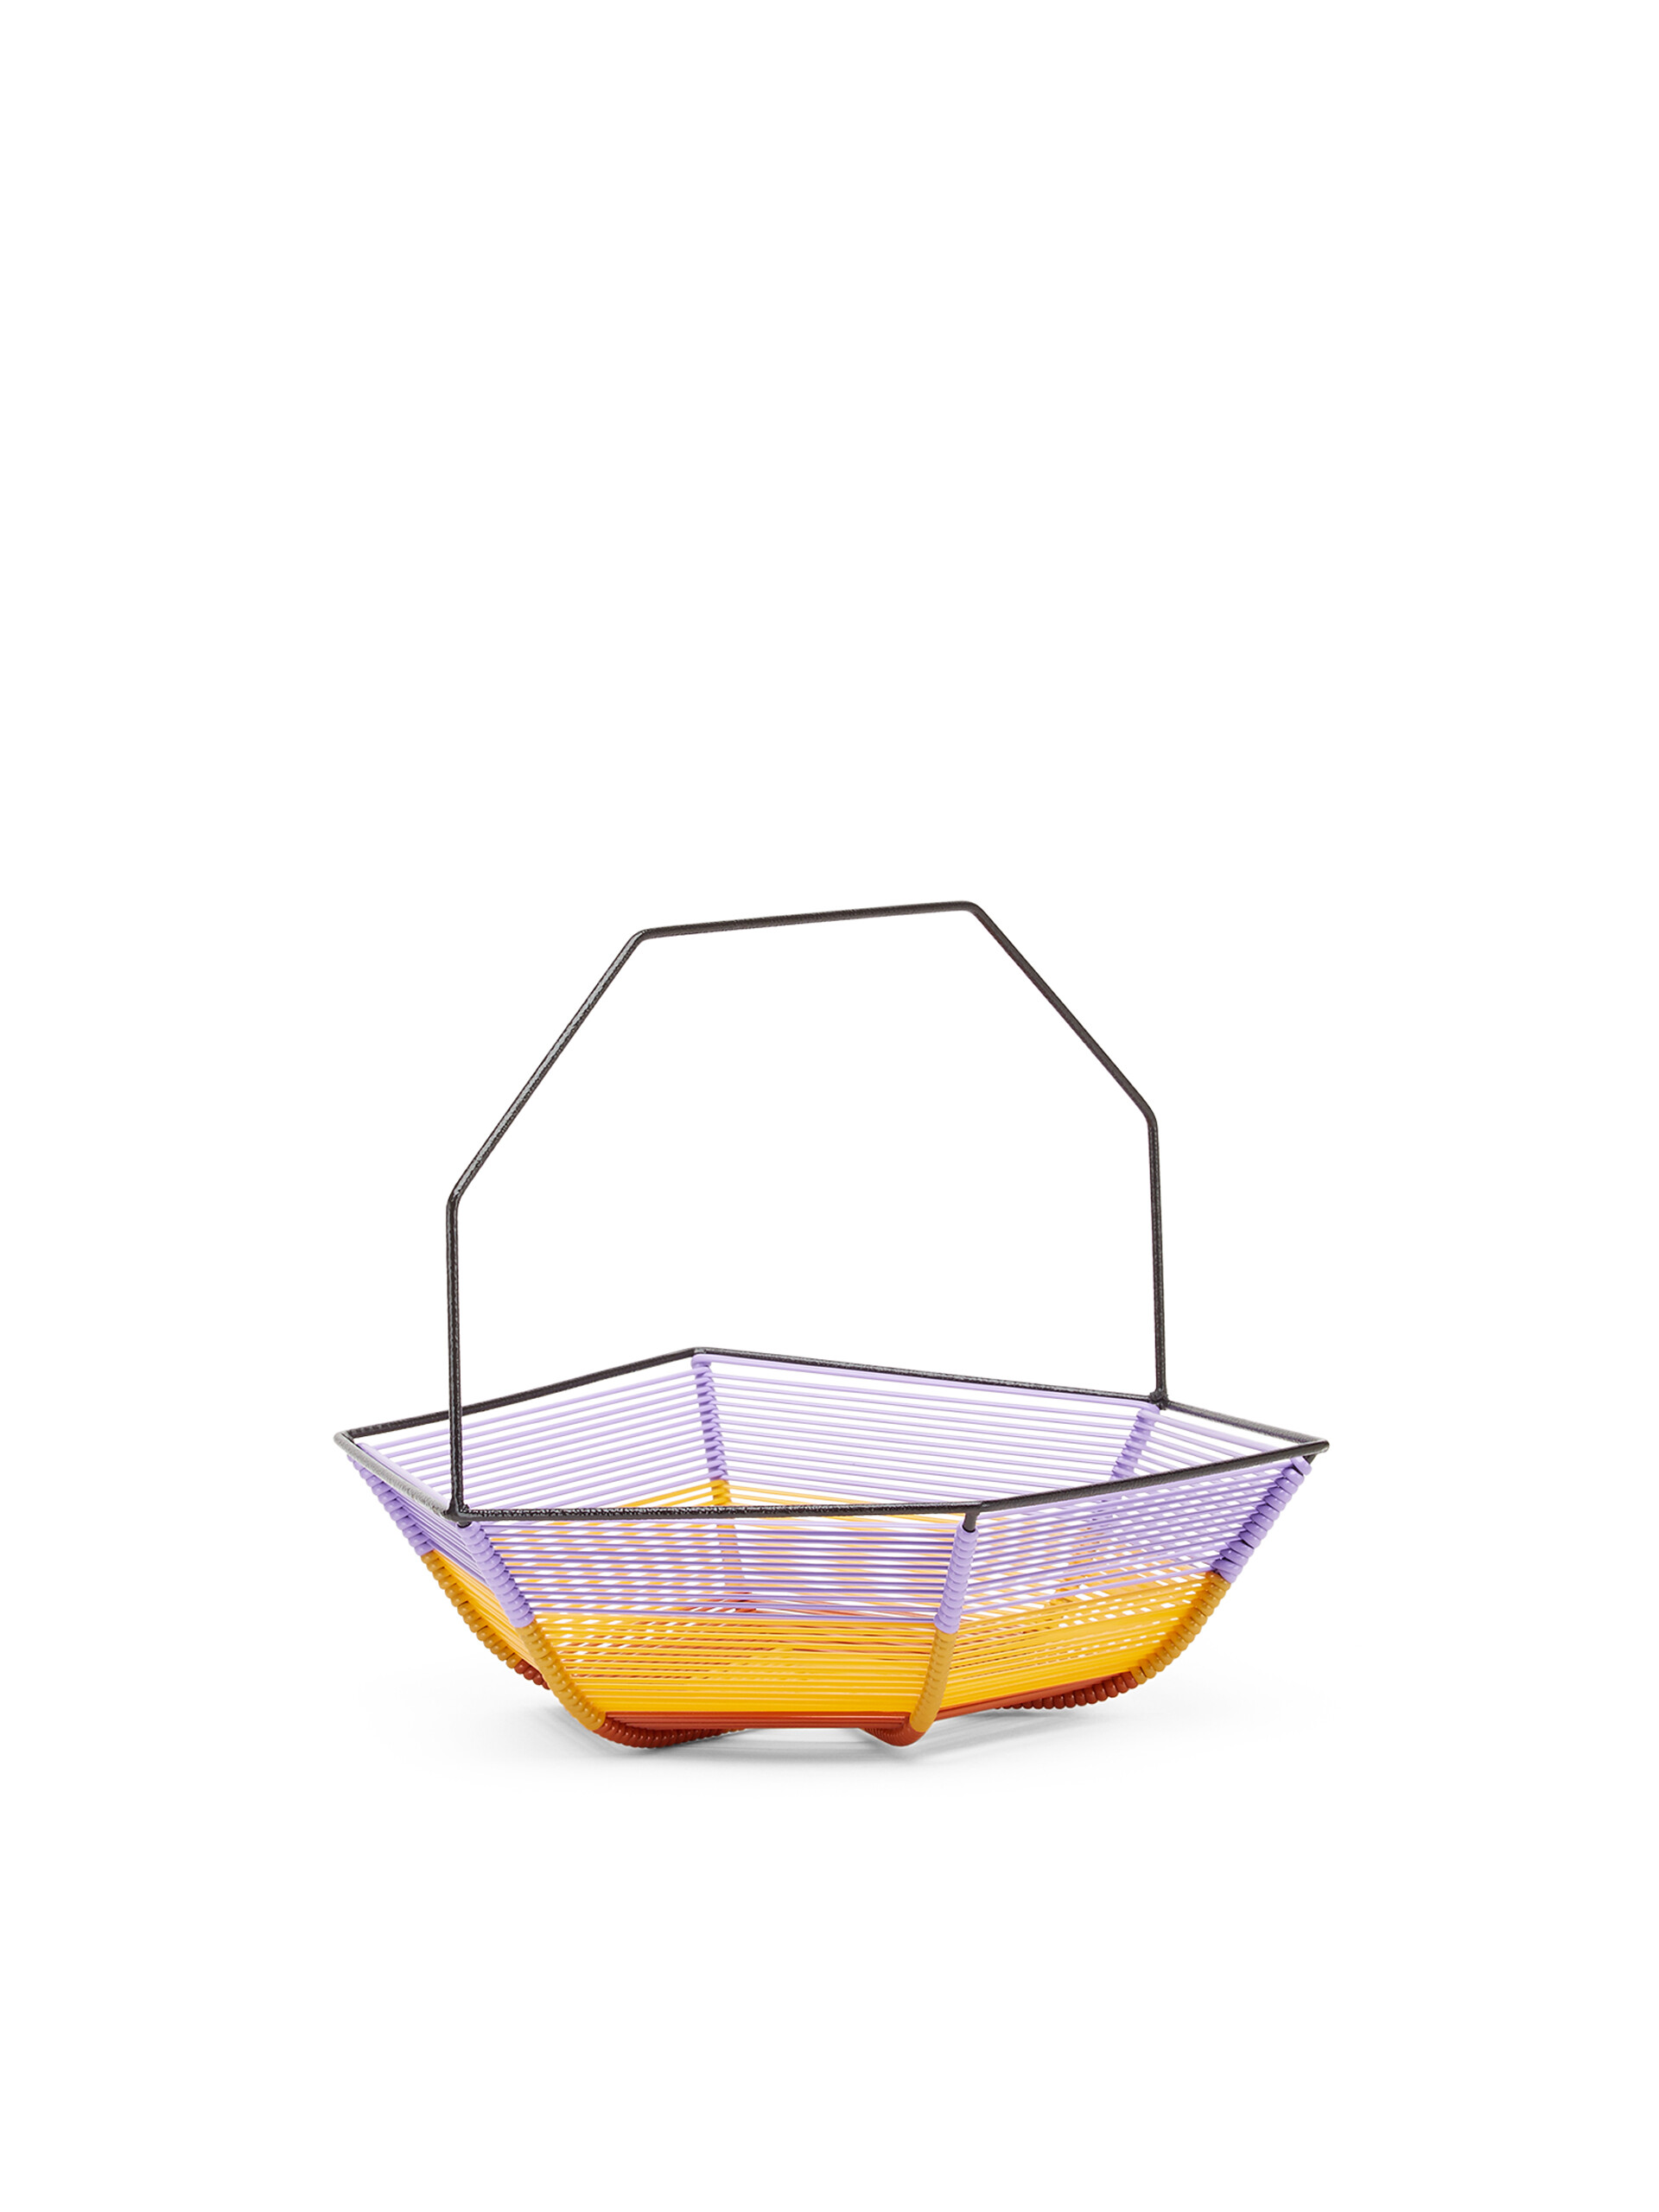 MARNI MARKET iron hexagonal fruit holder in  lilac yellow and brown - Accessories - Image 2